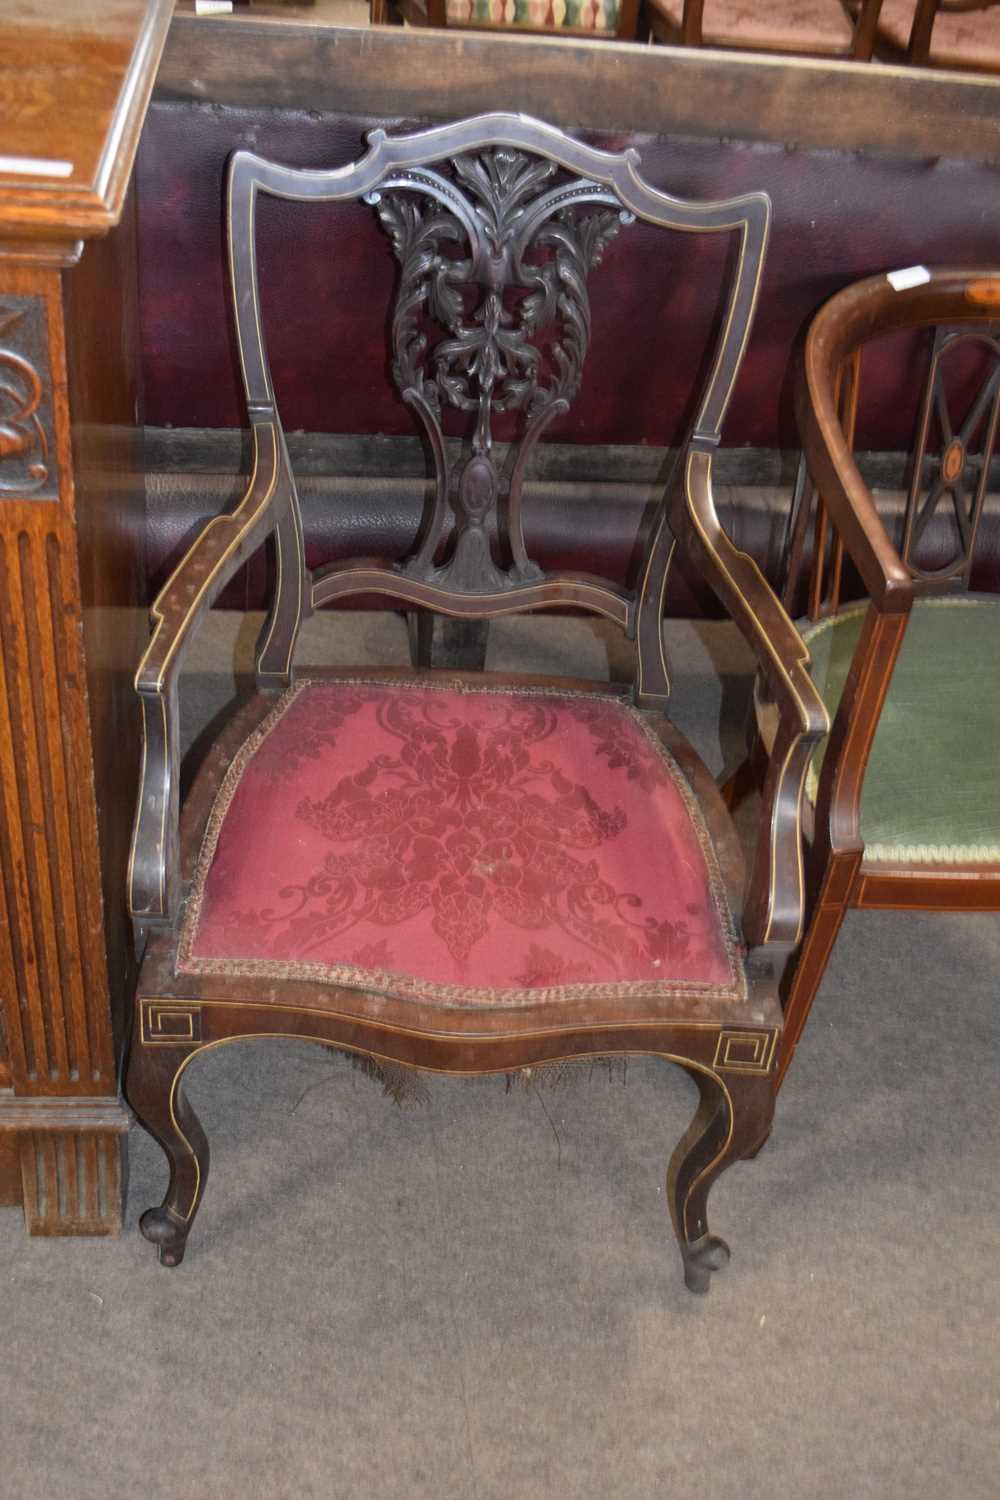 Late 19th/early 20th century mahogany framed armchair with pierced splat back and inlaid